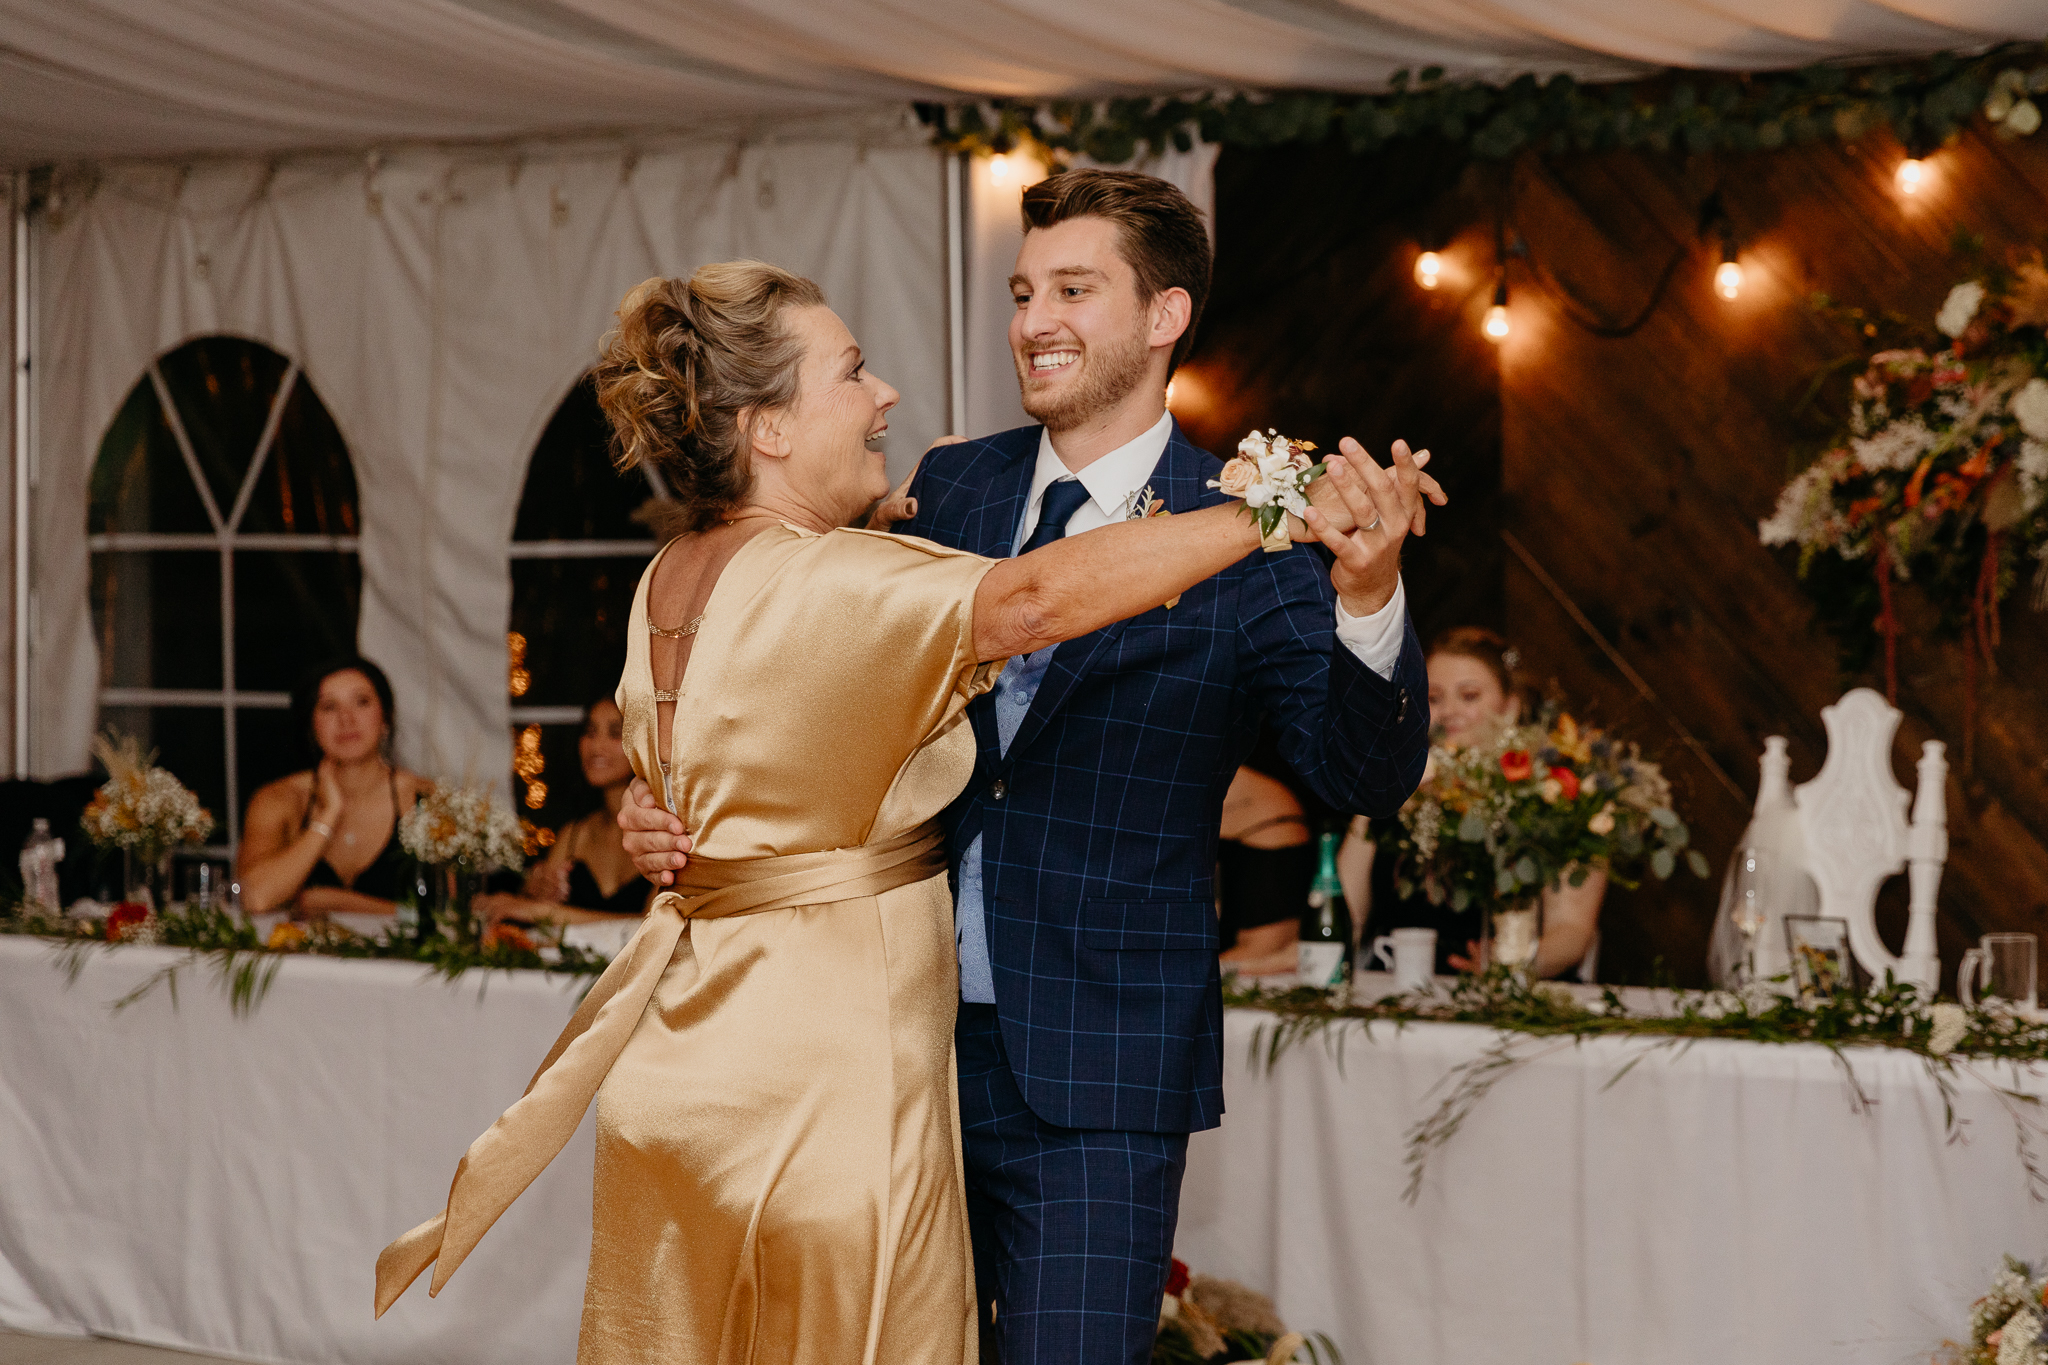 Groom dances with his mother on the dancefloor in a white tent wedding